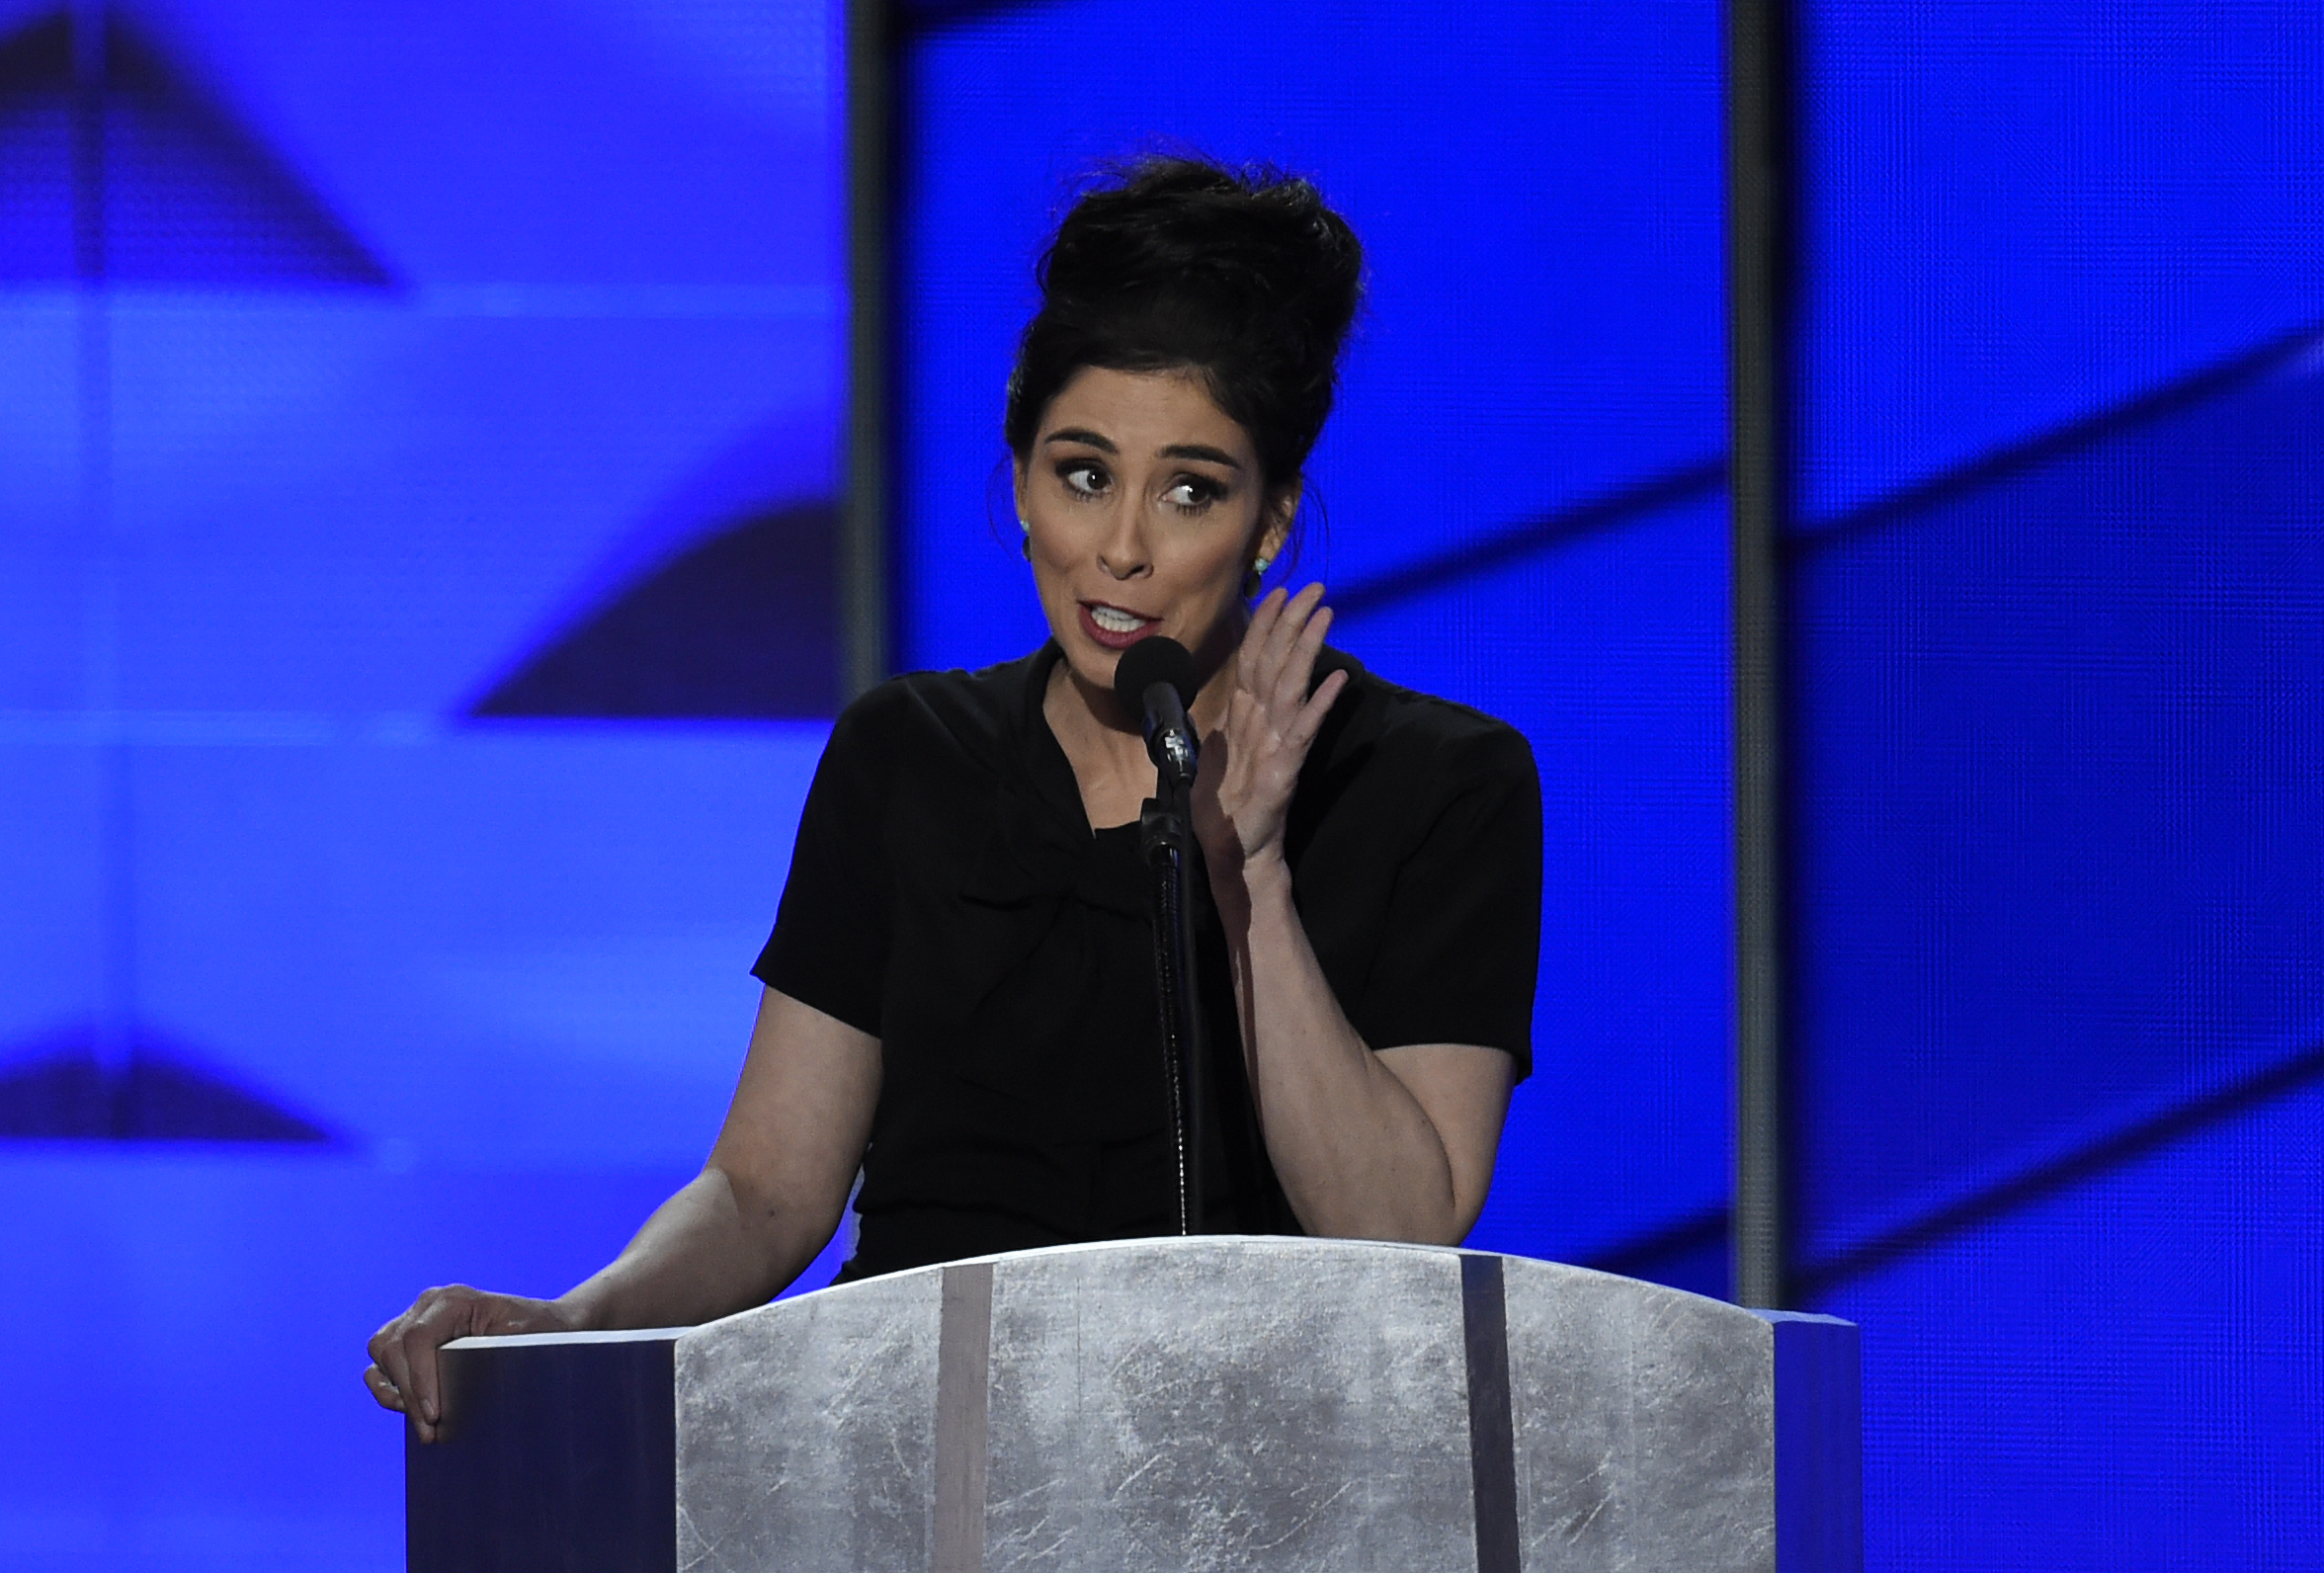 Comedian Sarah Silverman speaks during Day 1 of the Democratic National Convention at the Wells Fargo Center in Philadelphia, Pennsylvania, July 25, 2016. / AFP PHOTO / SAUL LOEB